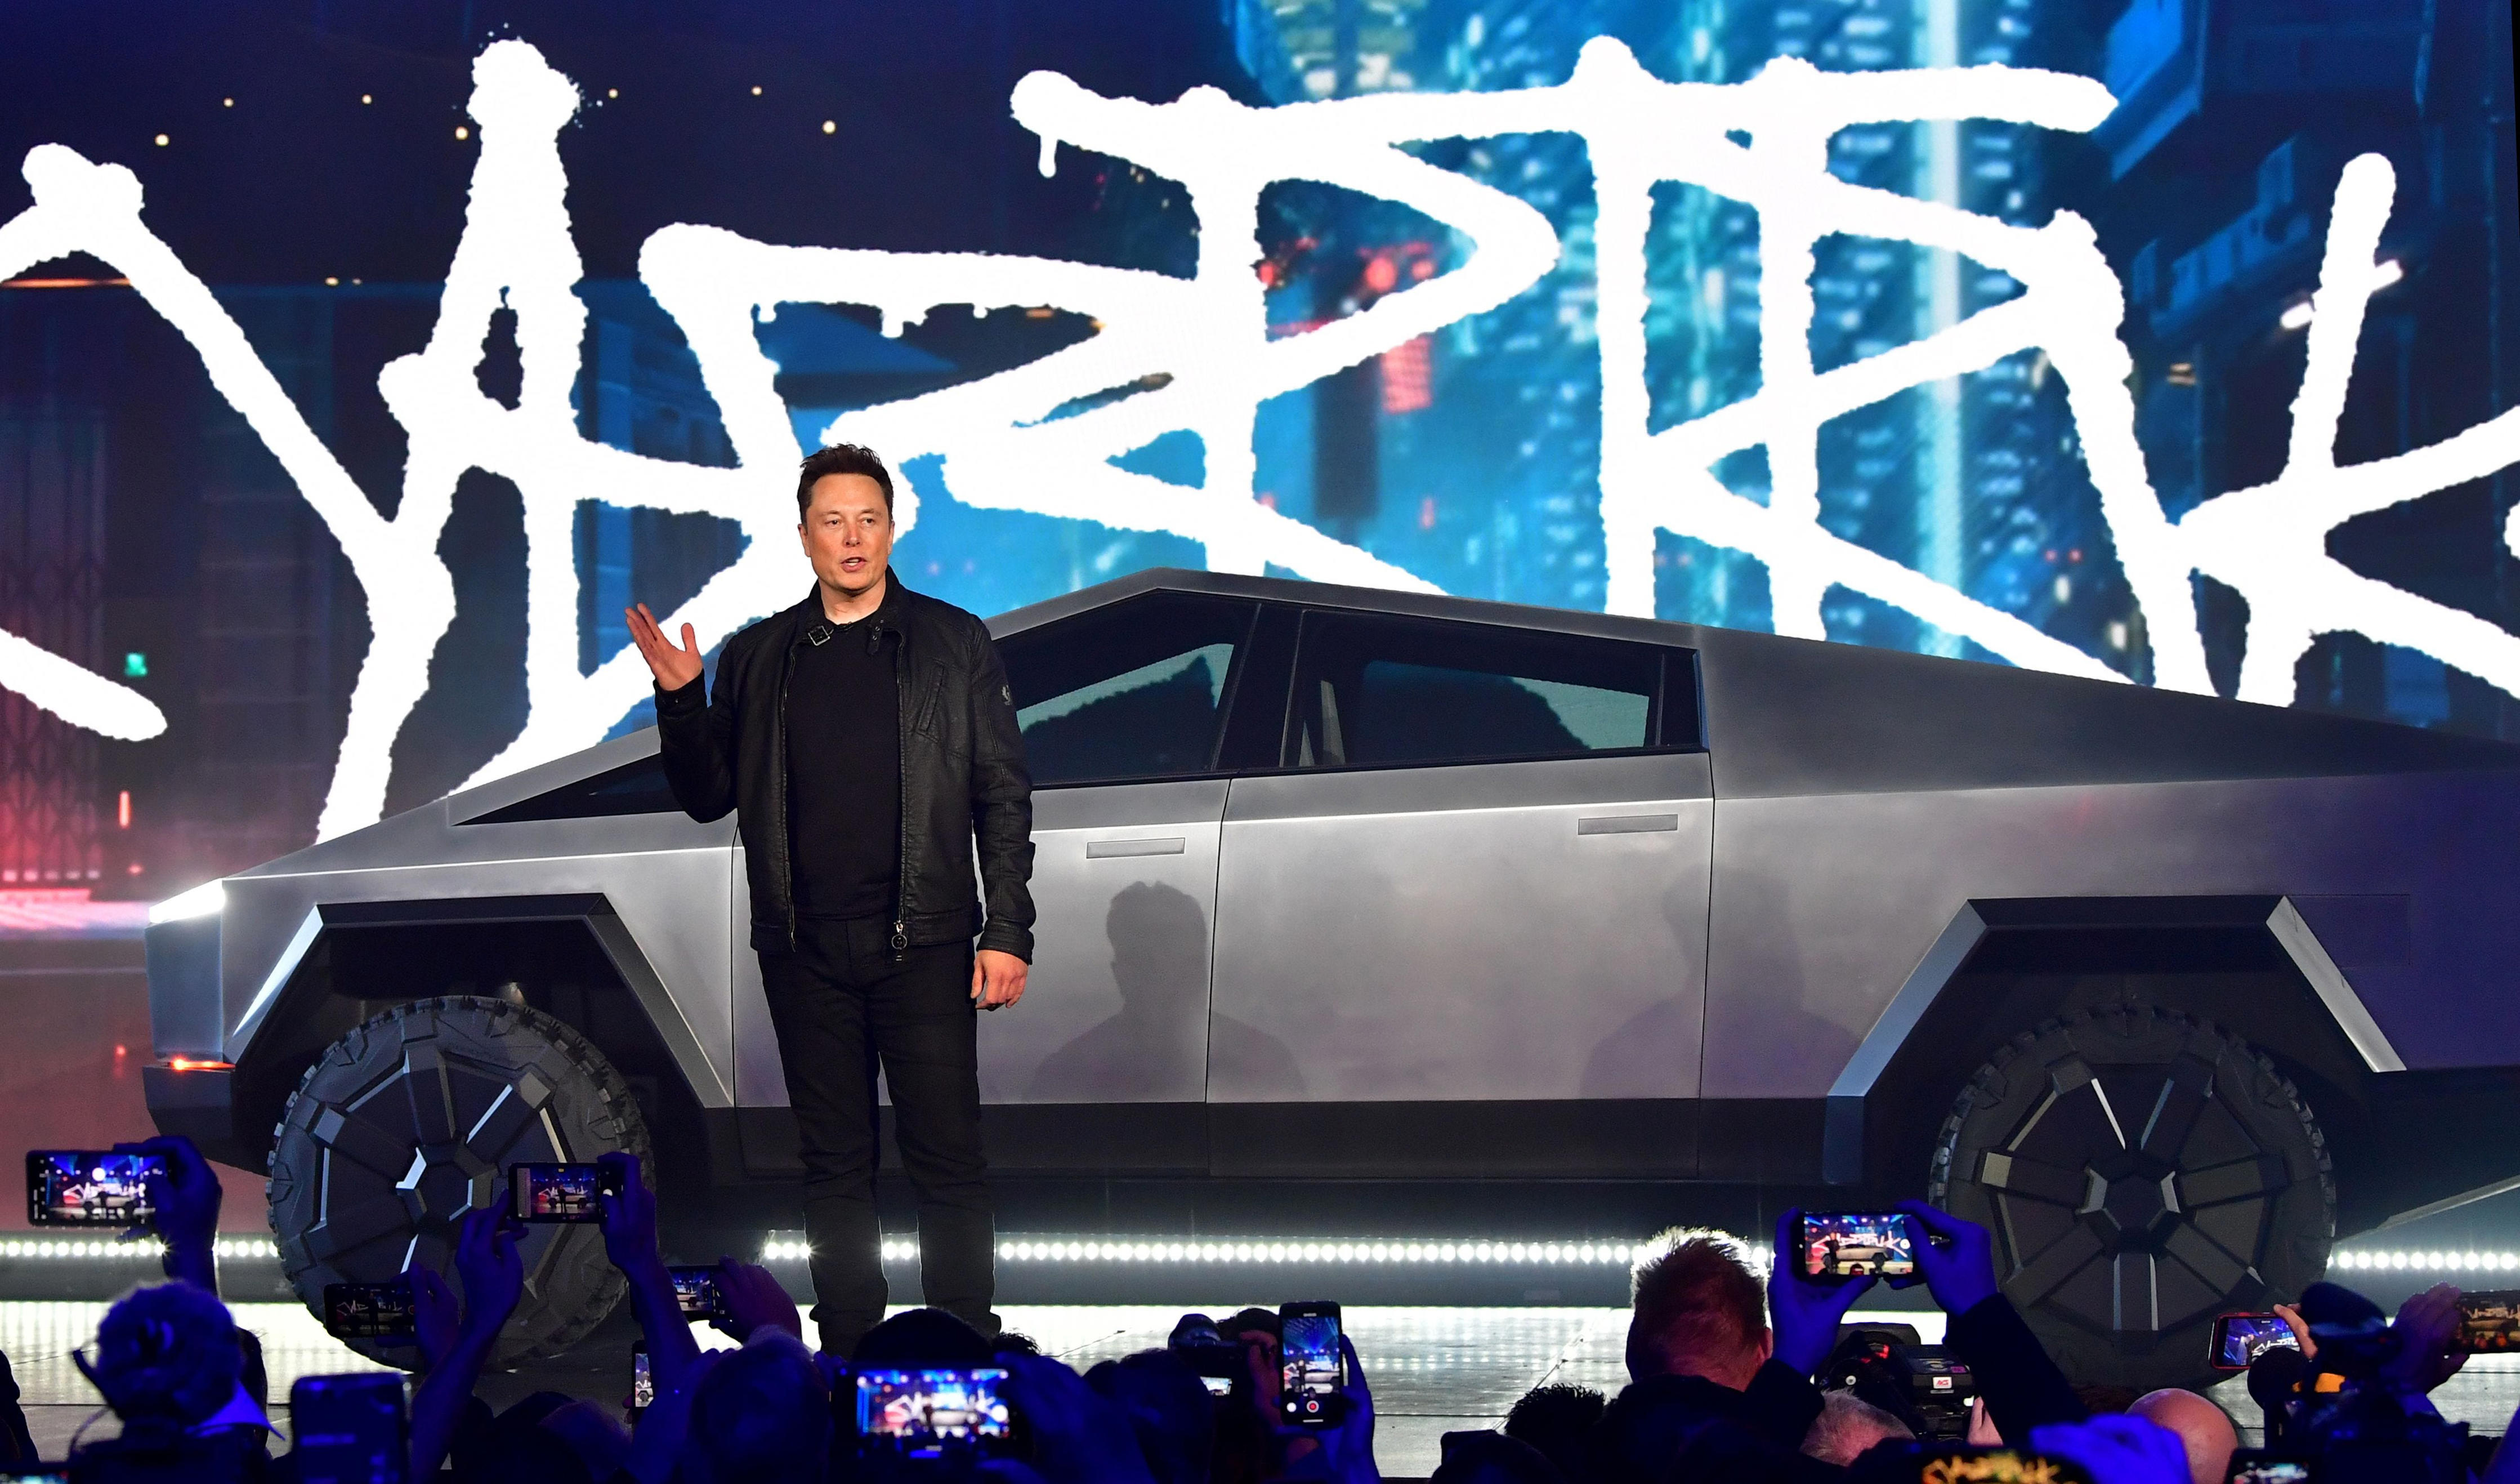 Tesla CEO Elon Musk introducing the Cybertruck in November 2019. <a>Frederic J. Brown/AFP via Getty Images</a>